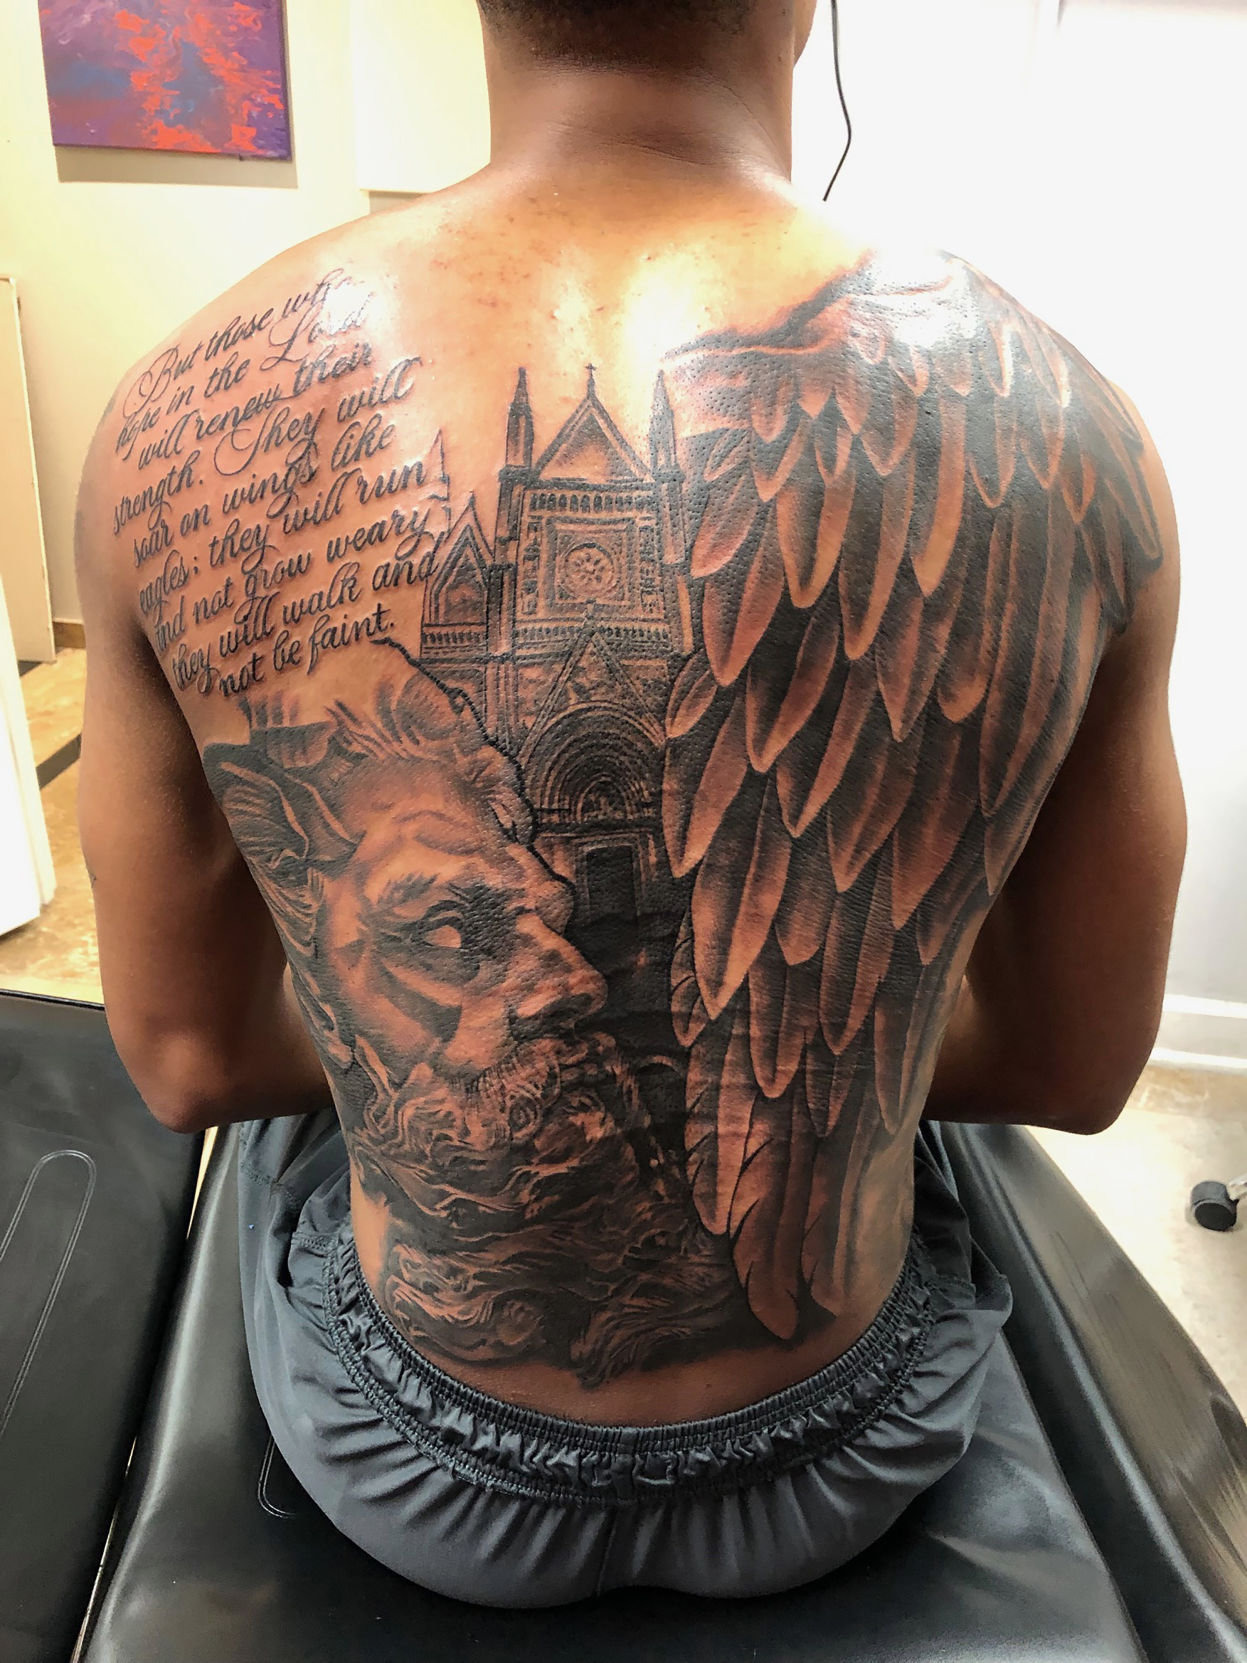 natebjorktattoos just put the finishing touches on this chest piece. Thanks  for looking! #electrictattooparlor | Instagram